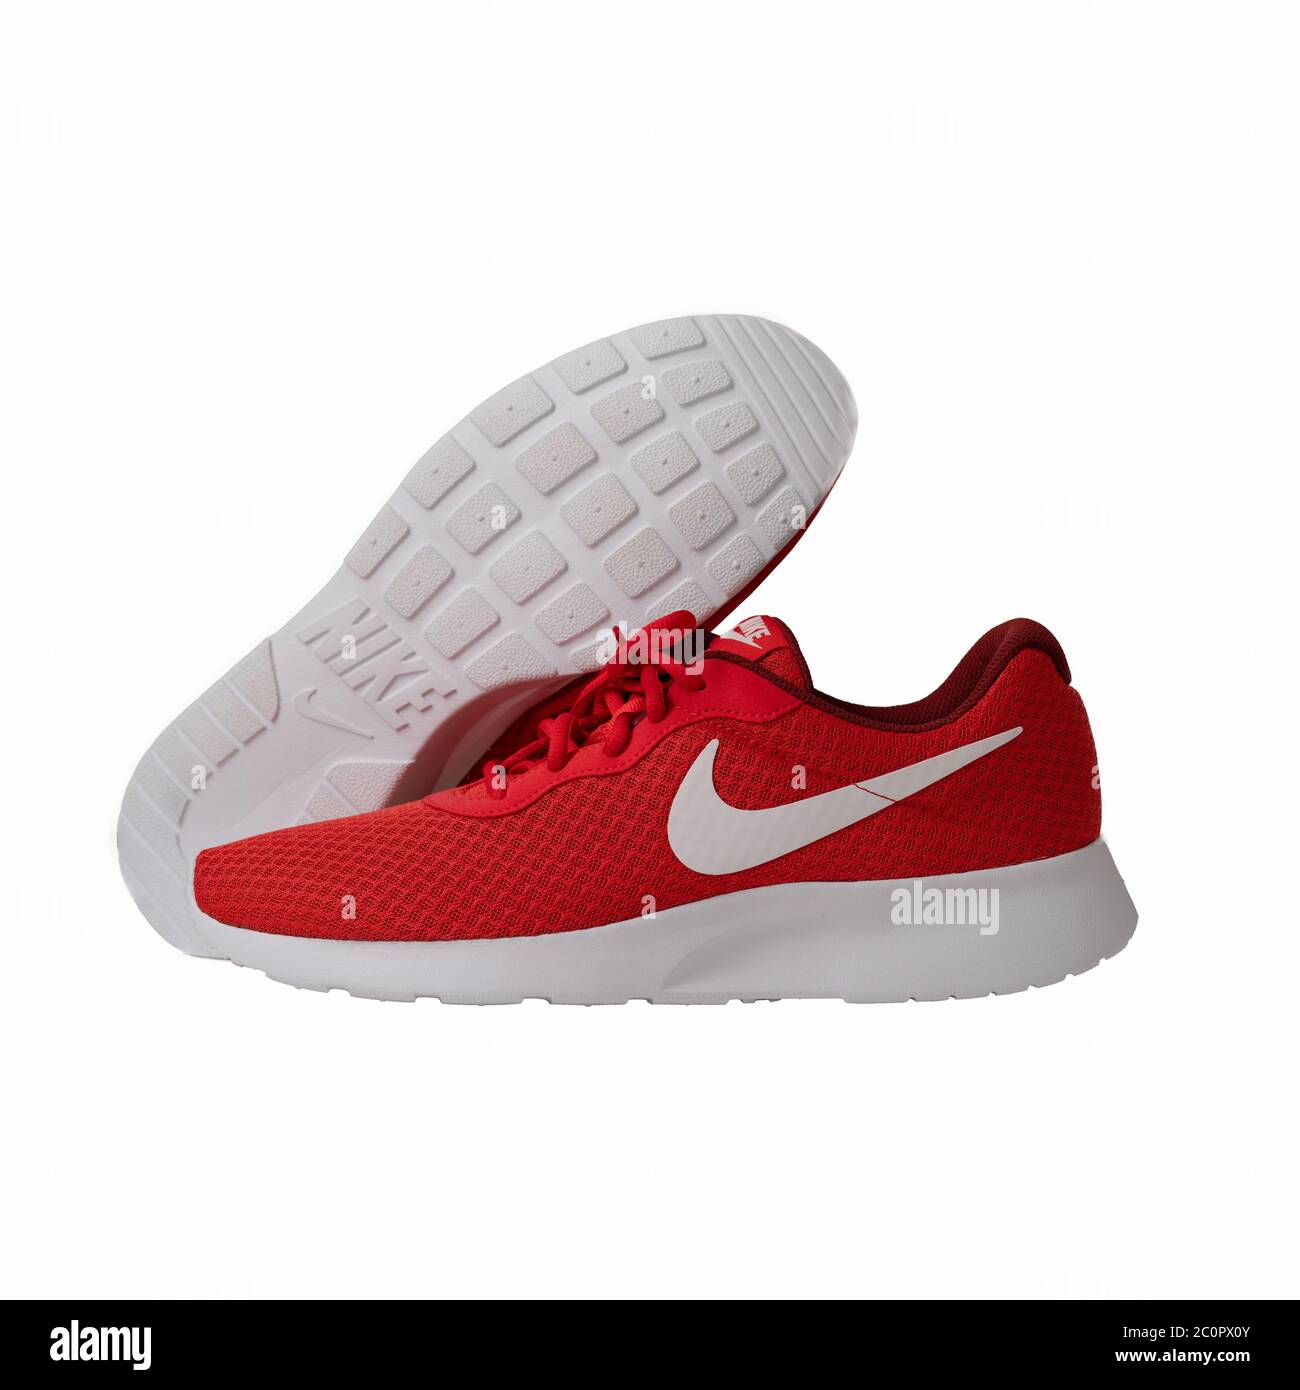 search nike shoes by model number